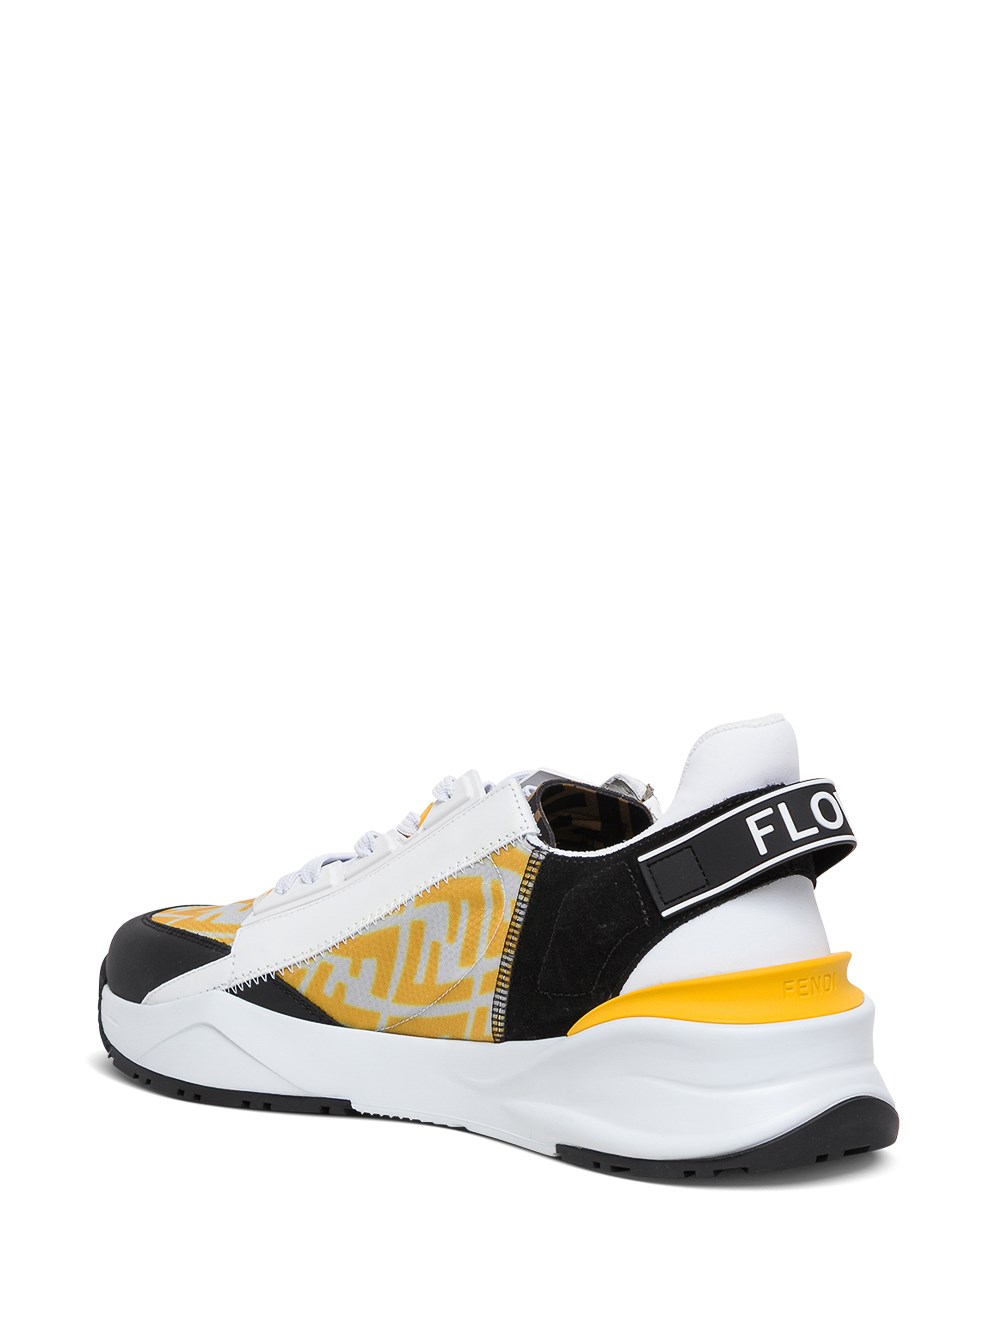 Flow Sneakers in Technical Nylon Yellow available on gaudenziboutique ...